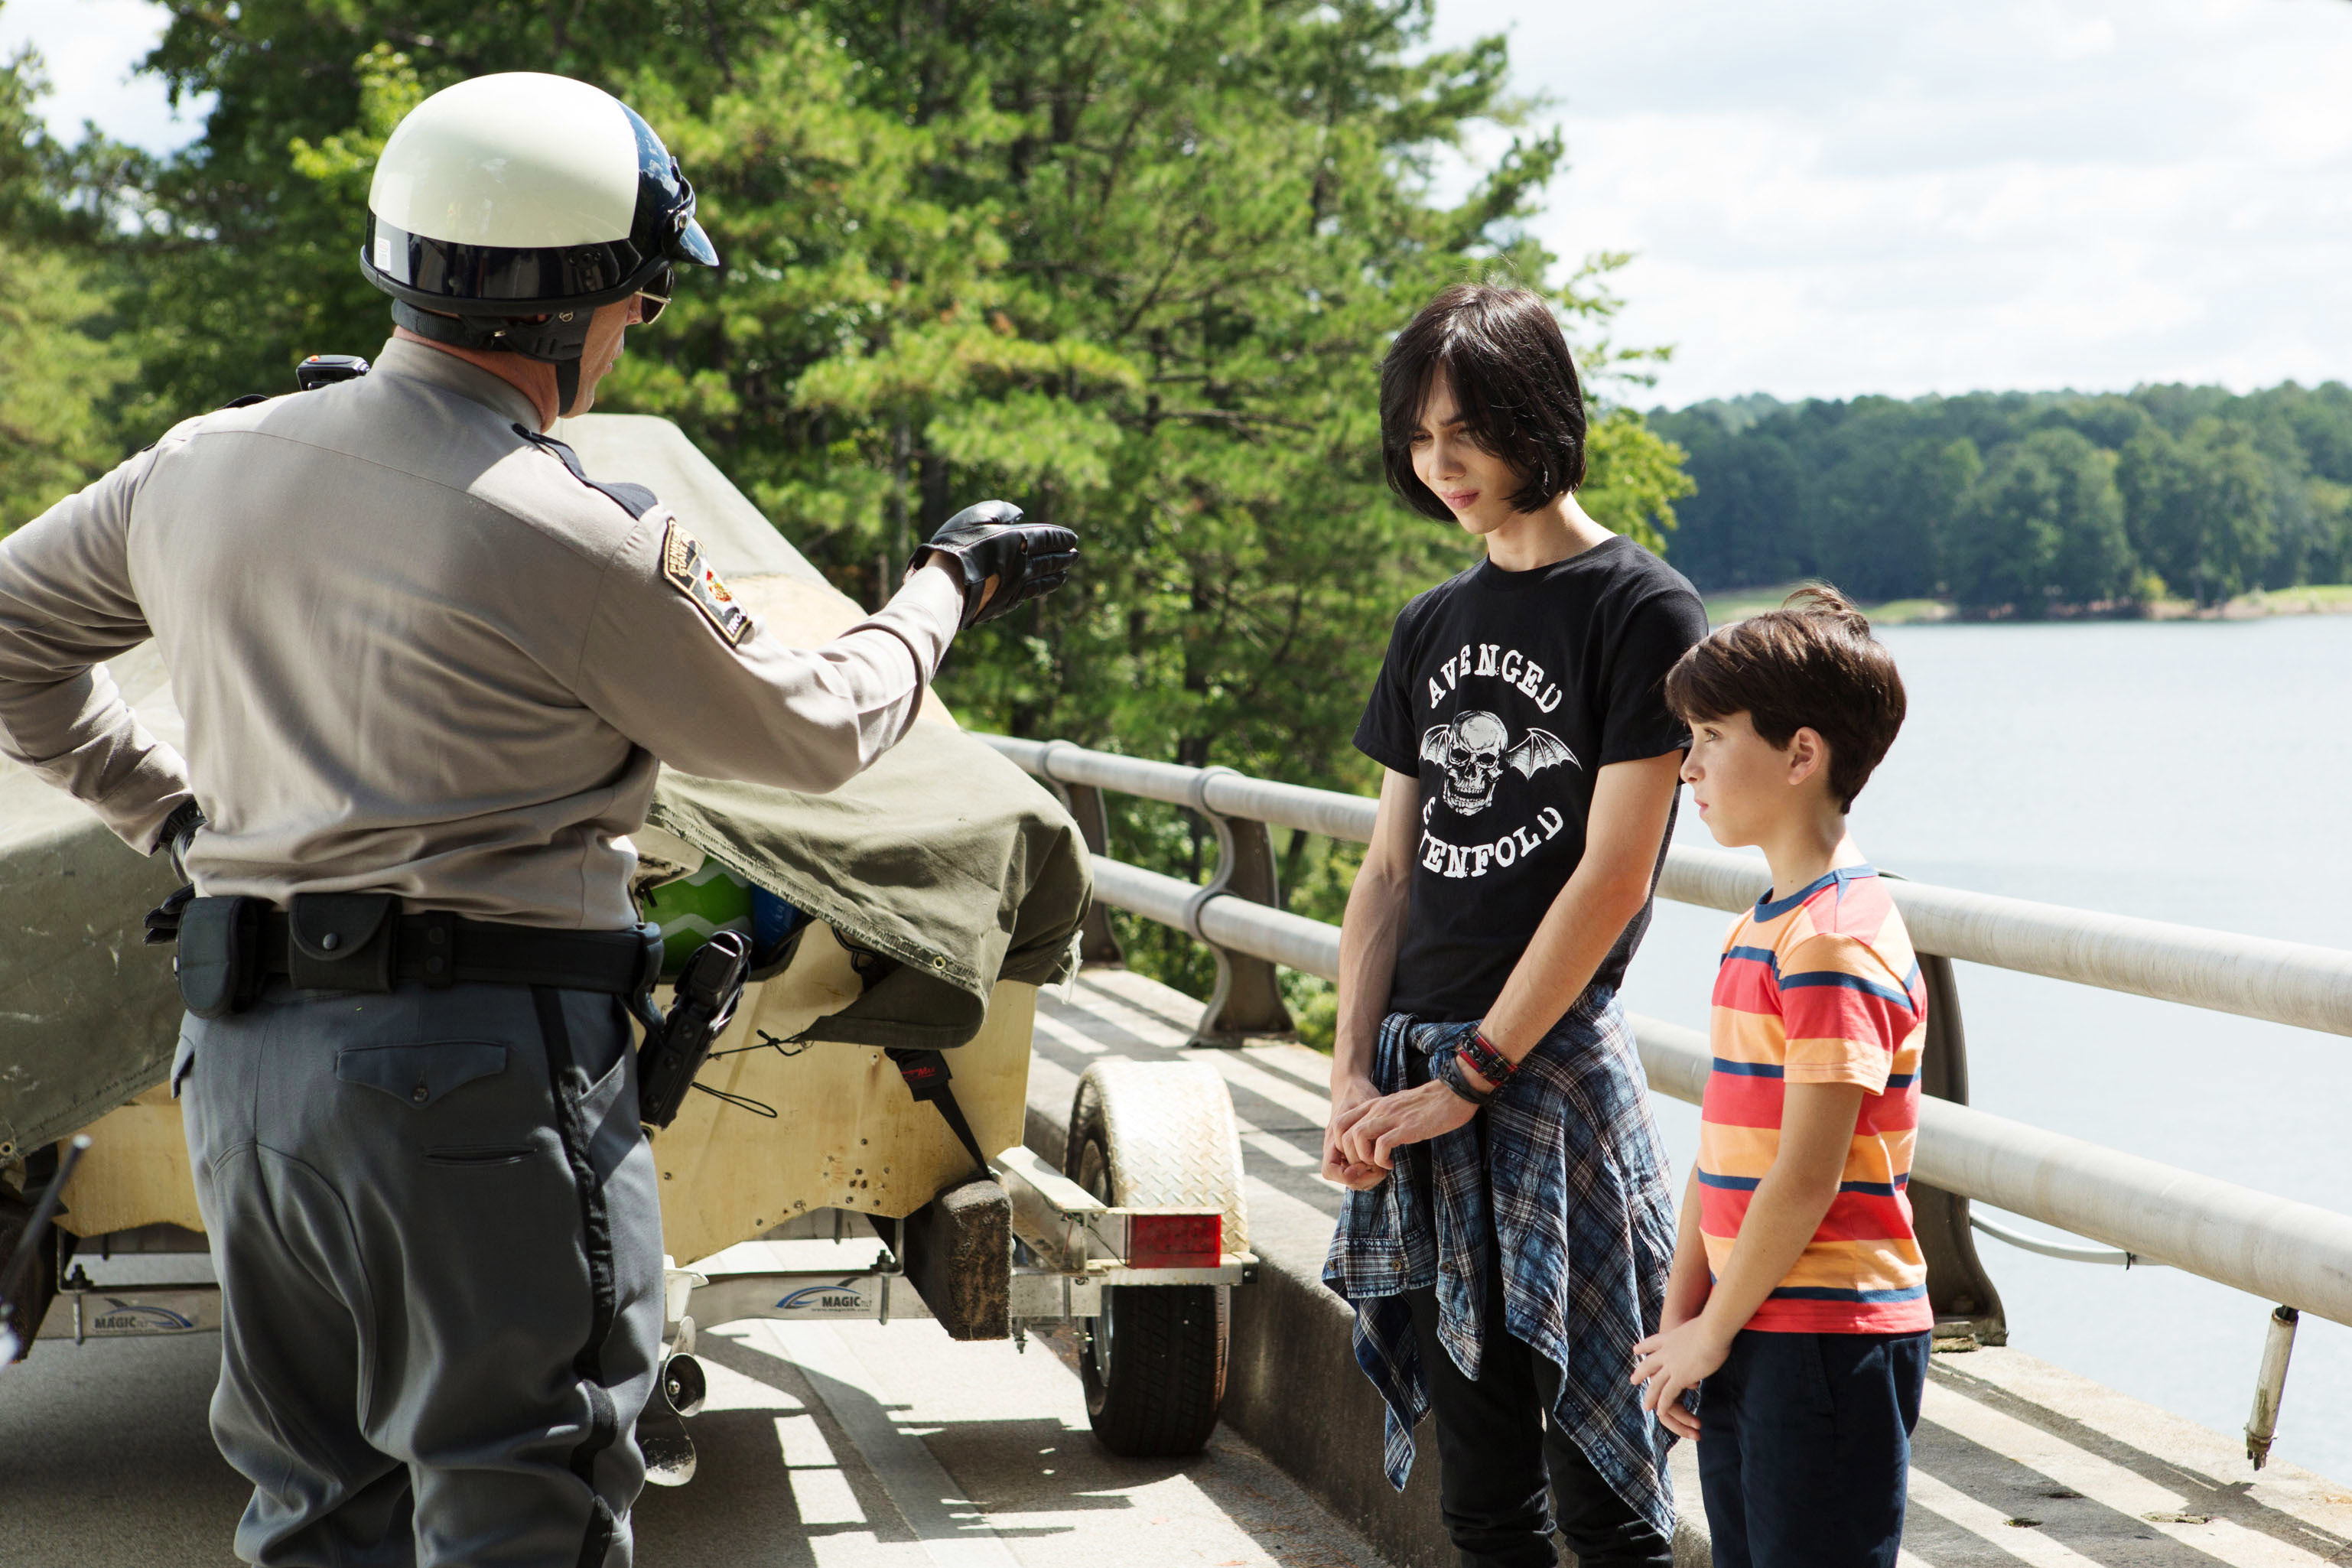 A police officer interacts with two young boys by a lake, one wearing a &quot;Chicago&quot; T-shirt, the other in stripes